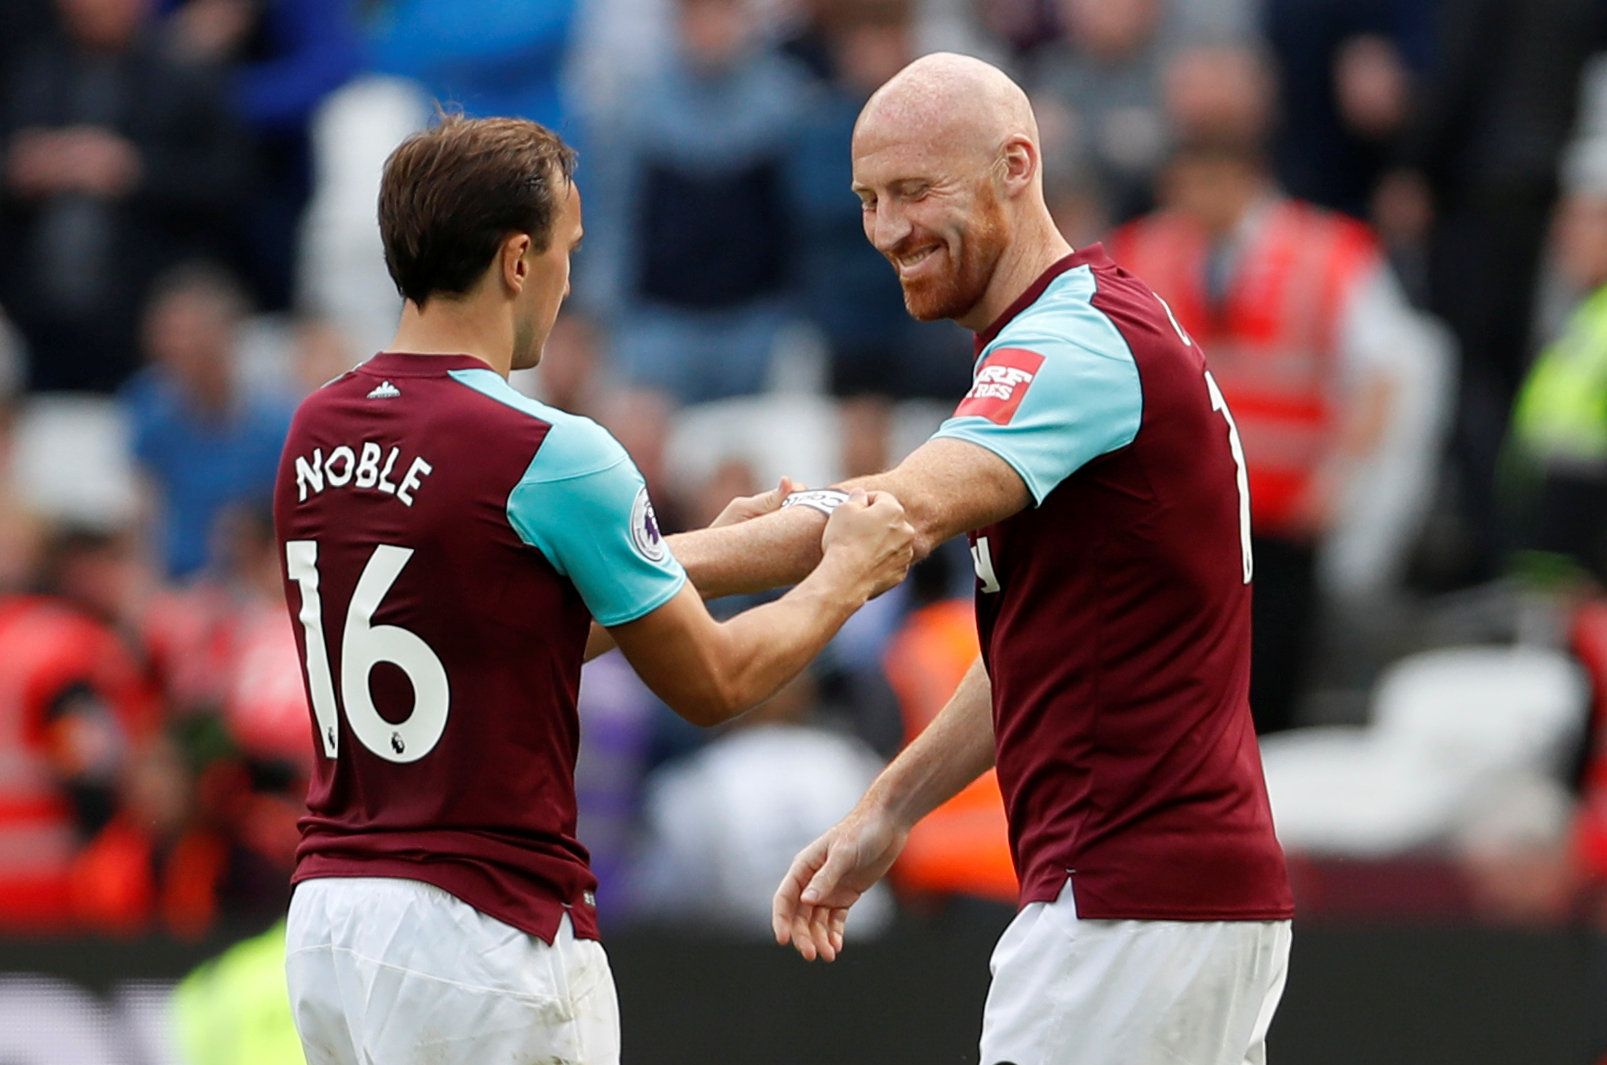 Soccer Football - Premier League - West Ham United vs Everton - London Stadium, London, Britain - May 13, 2018   West Ham United's Mark Noble hands the captain's armband to James Collins    Action Images via Reuters/Paul Childs    EDITORIAL USE ONLY. No use with unauthorized audio, video, data, fixture lists, club/league logos or 